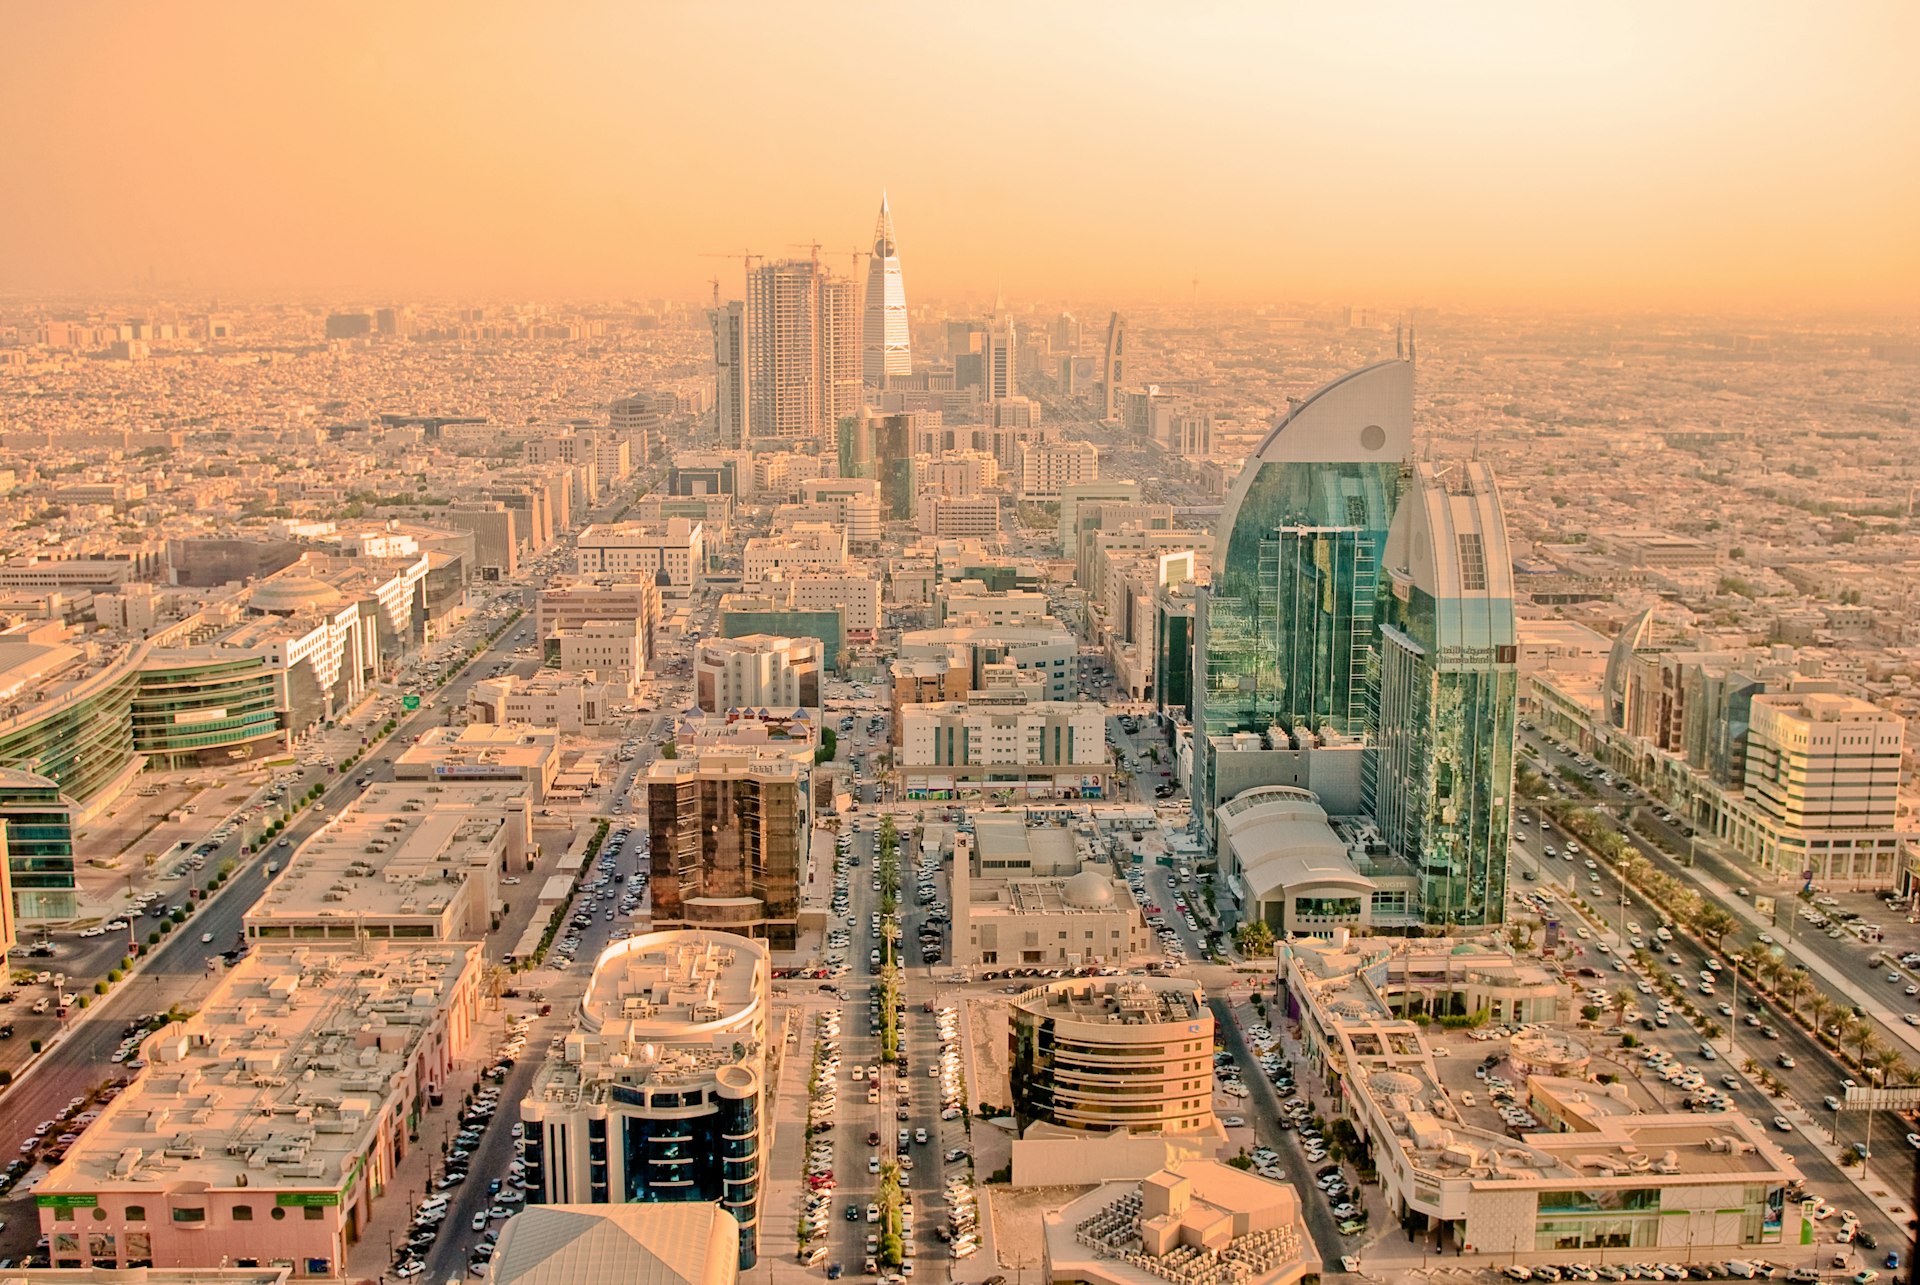 A picture of the Riyadh skyline